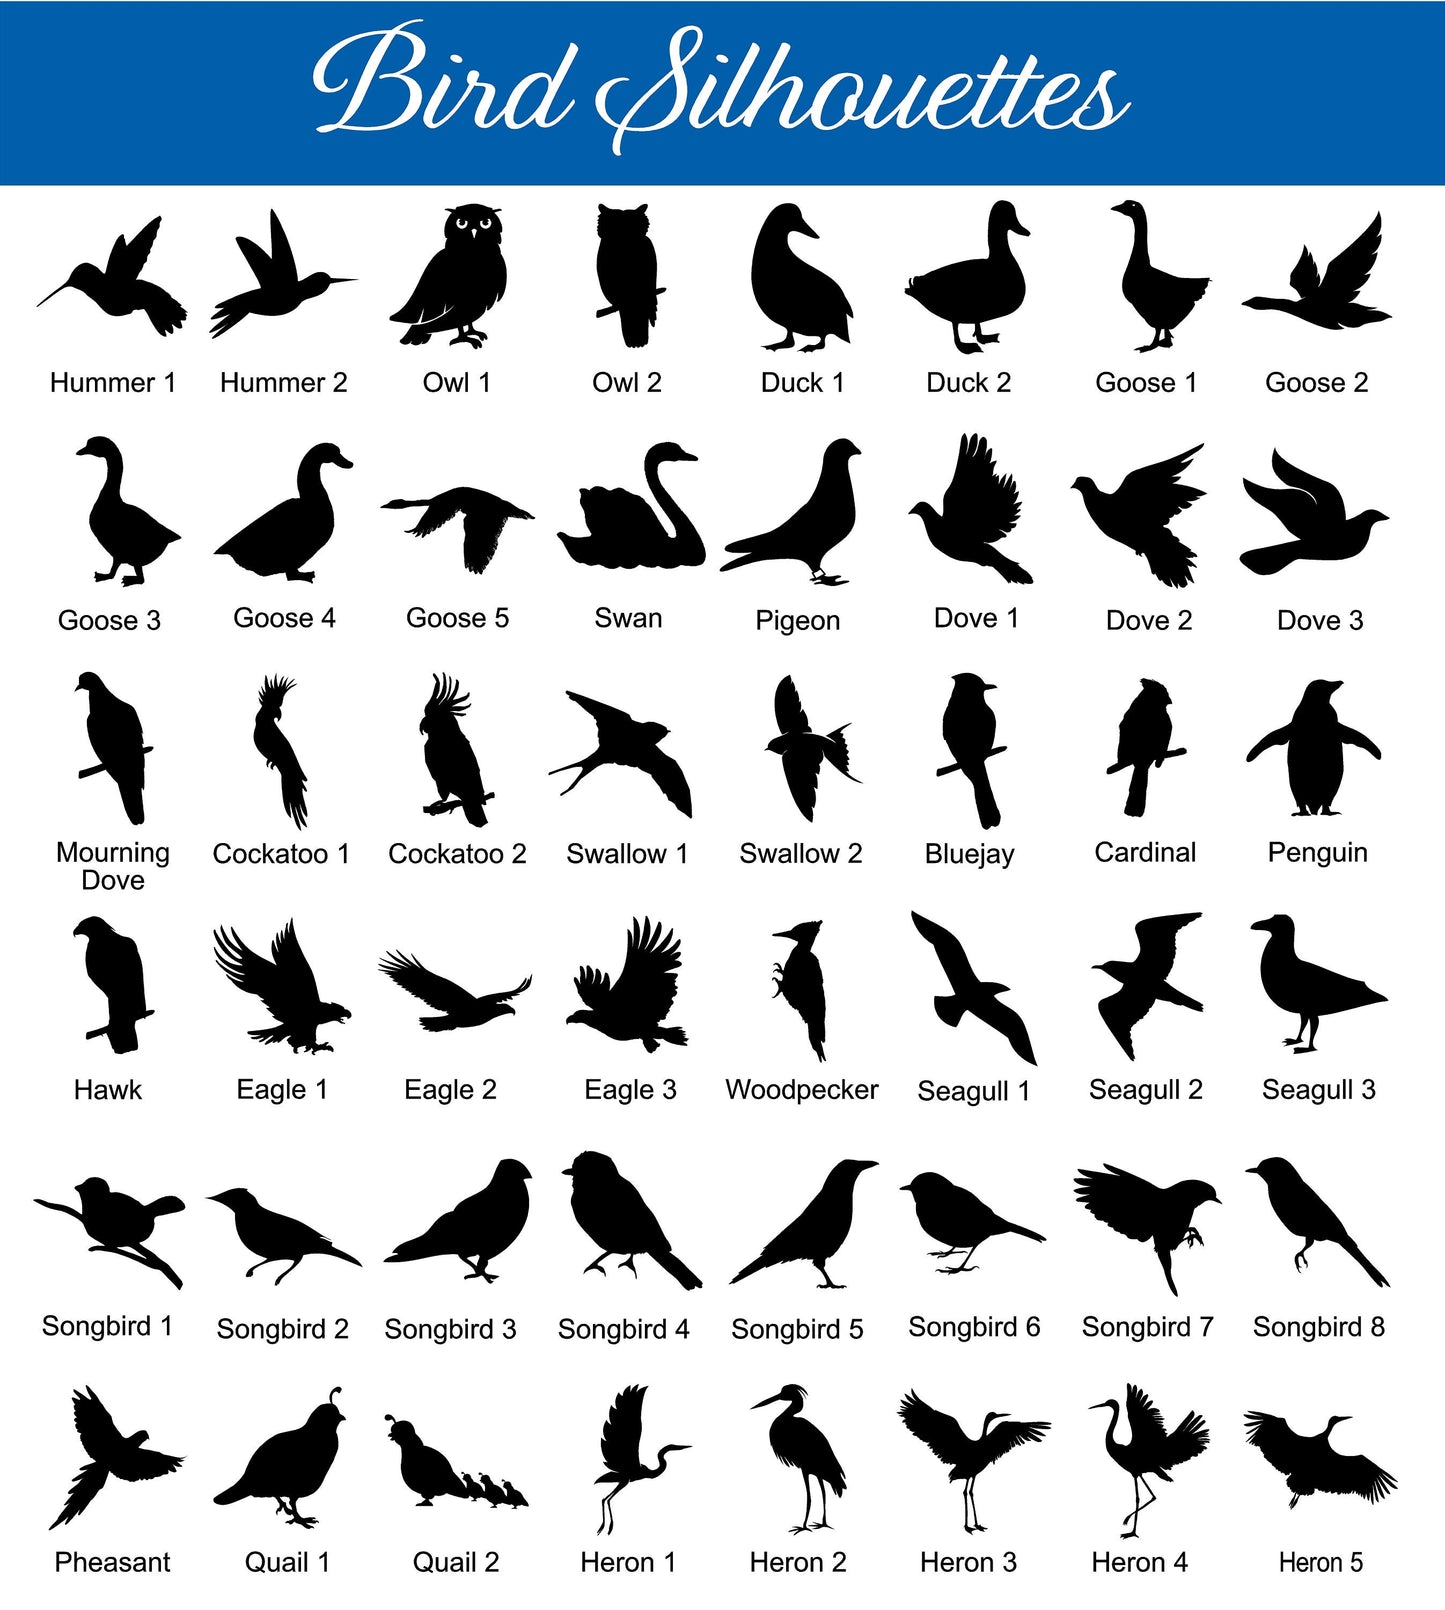 BIRD SILHOUETTES - 2 Sizes, Aluminum Composite Metal Cutout Never Rusts - Baked On Finish Lasts For Years